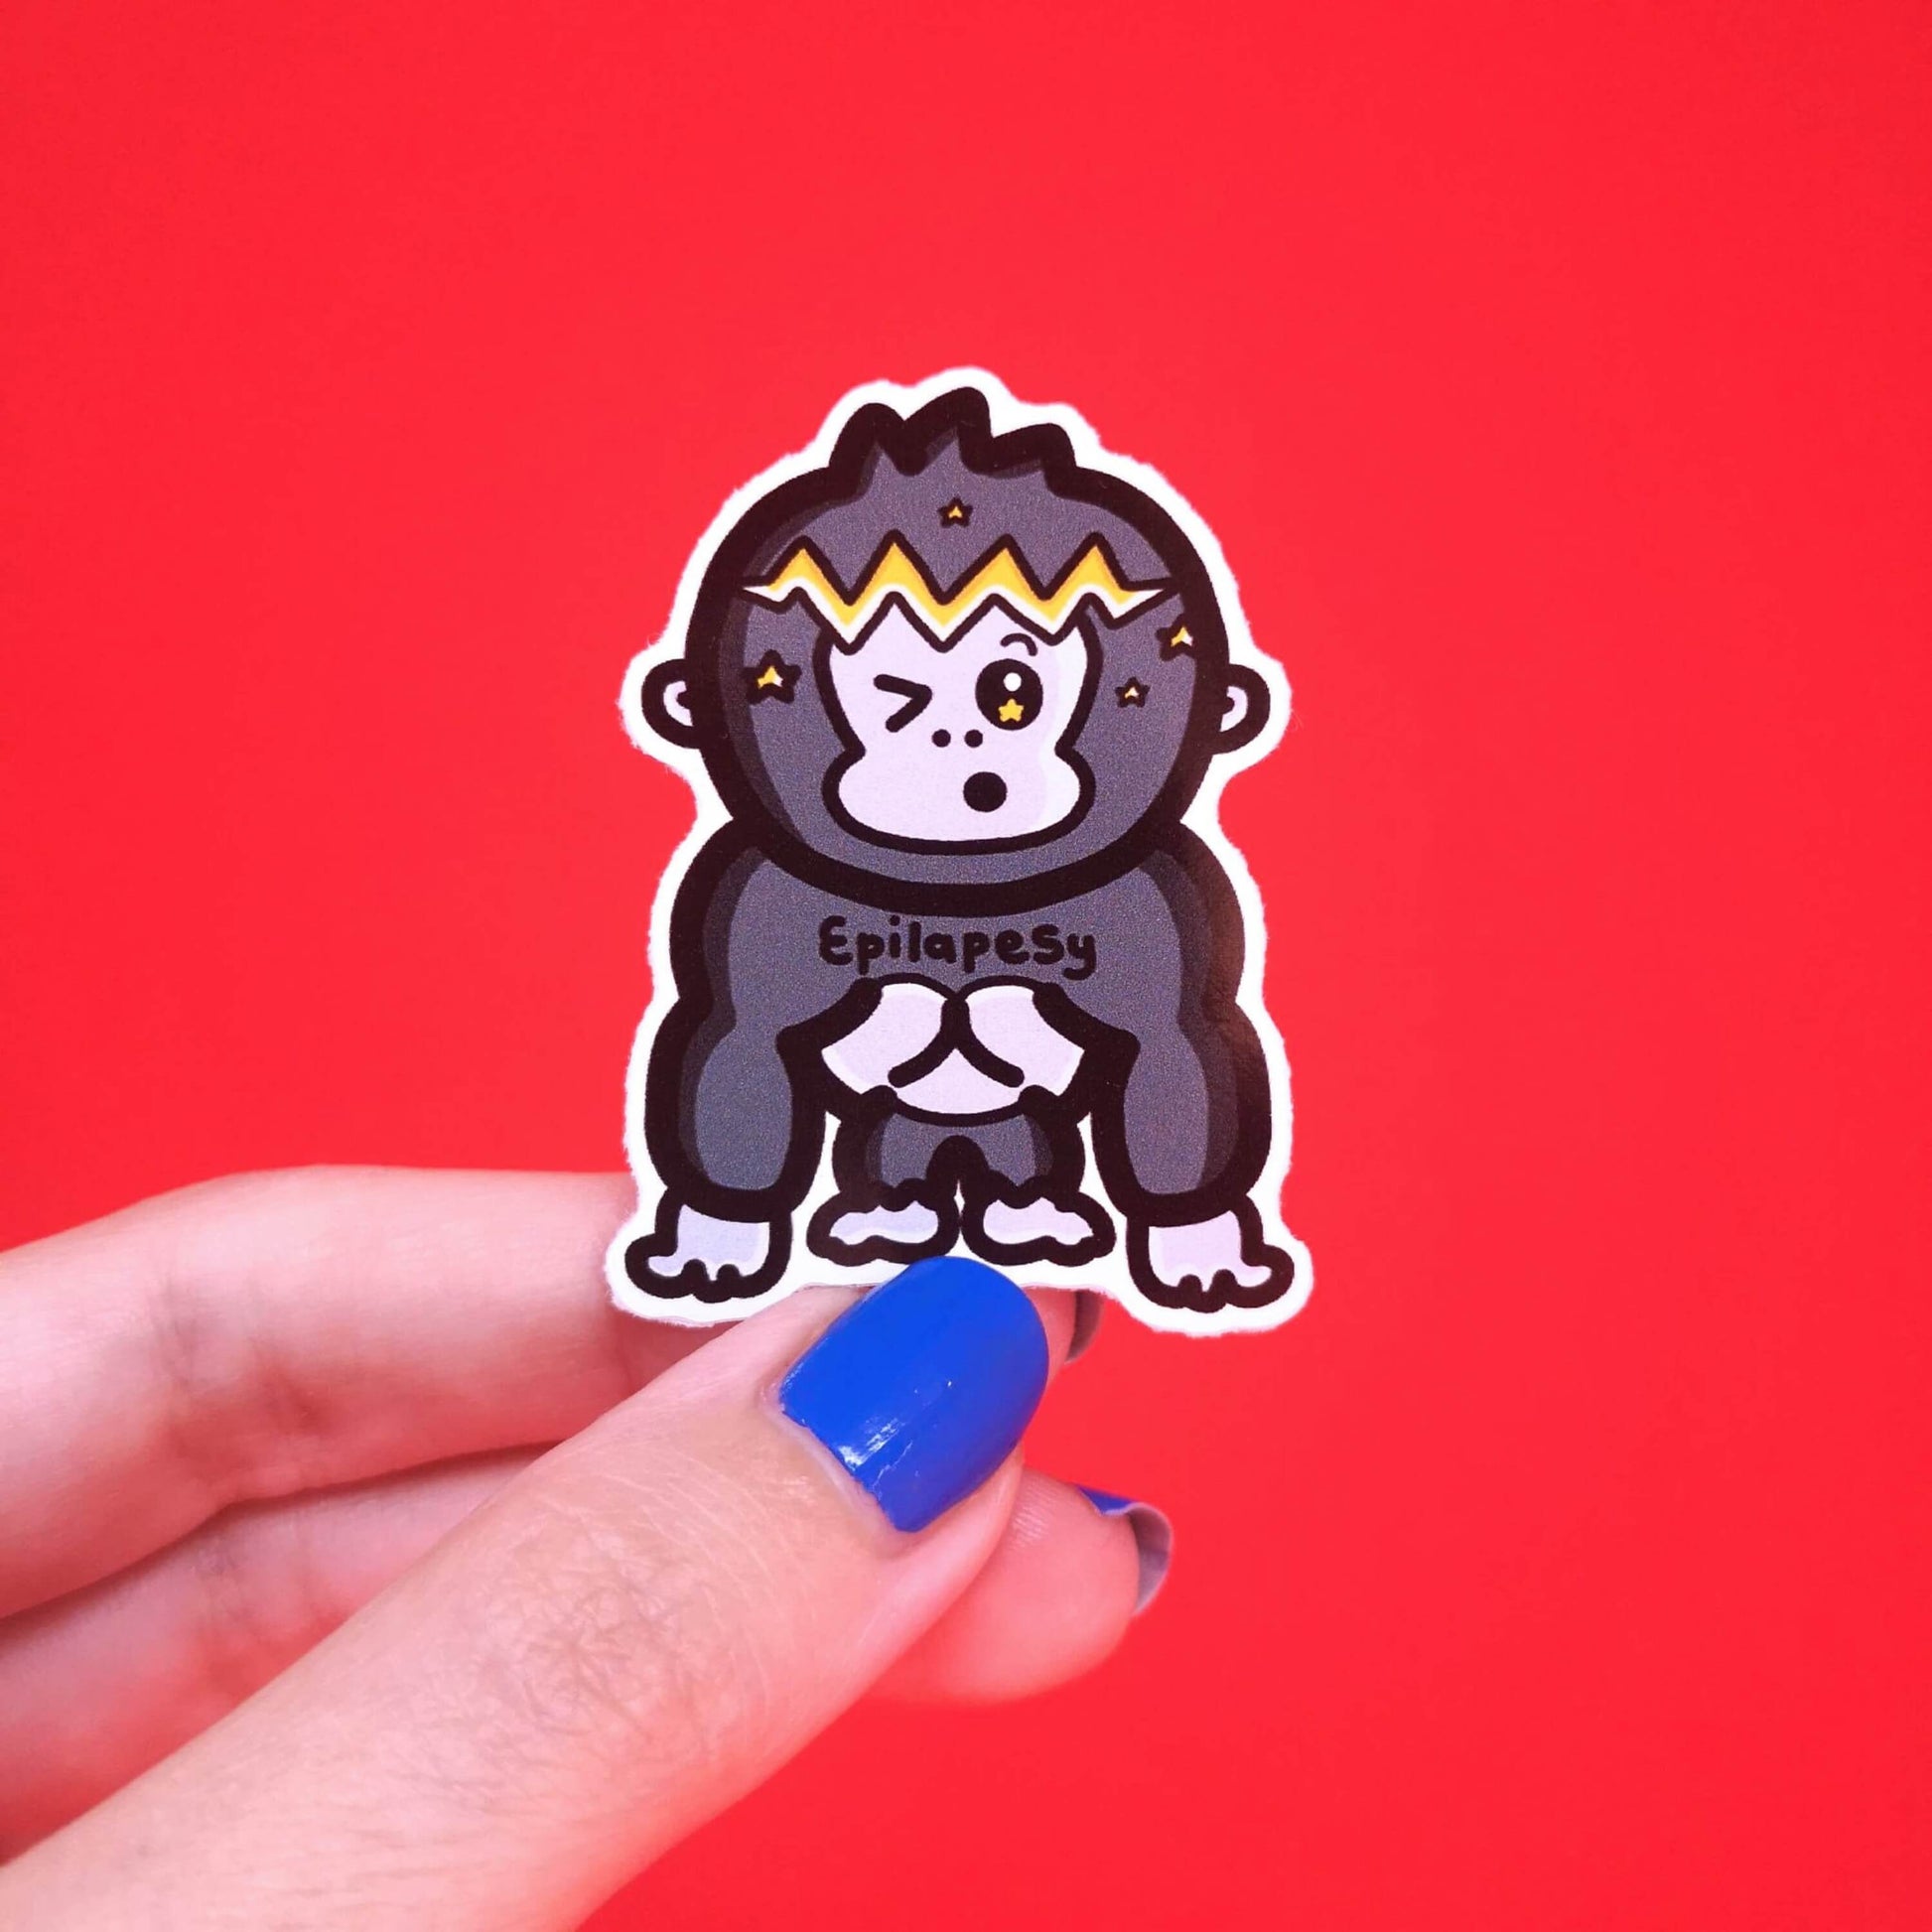 The Epilapesy - Epilepsy Ape Sticker being held over a red background. A gorilla ape shape sticker with a shocked open mouth expression with a yellow lightning bolt and stars across its head, across its chest in black reads 'epilapesy'. The hand drawn design is raising awareness for epilepsy and seizures.